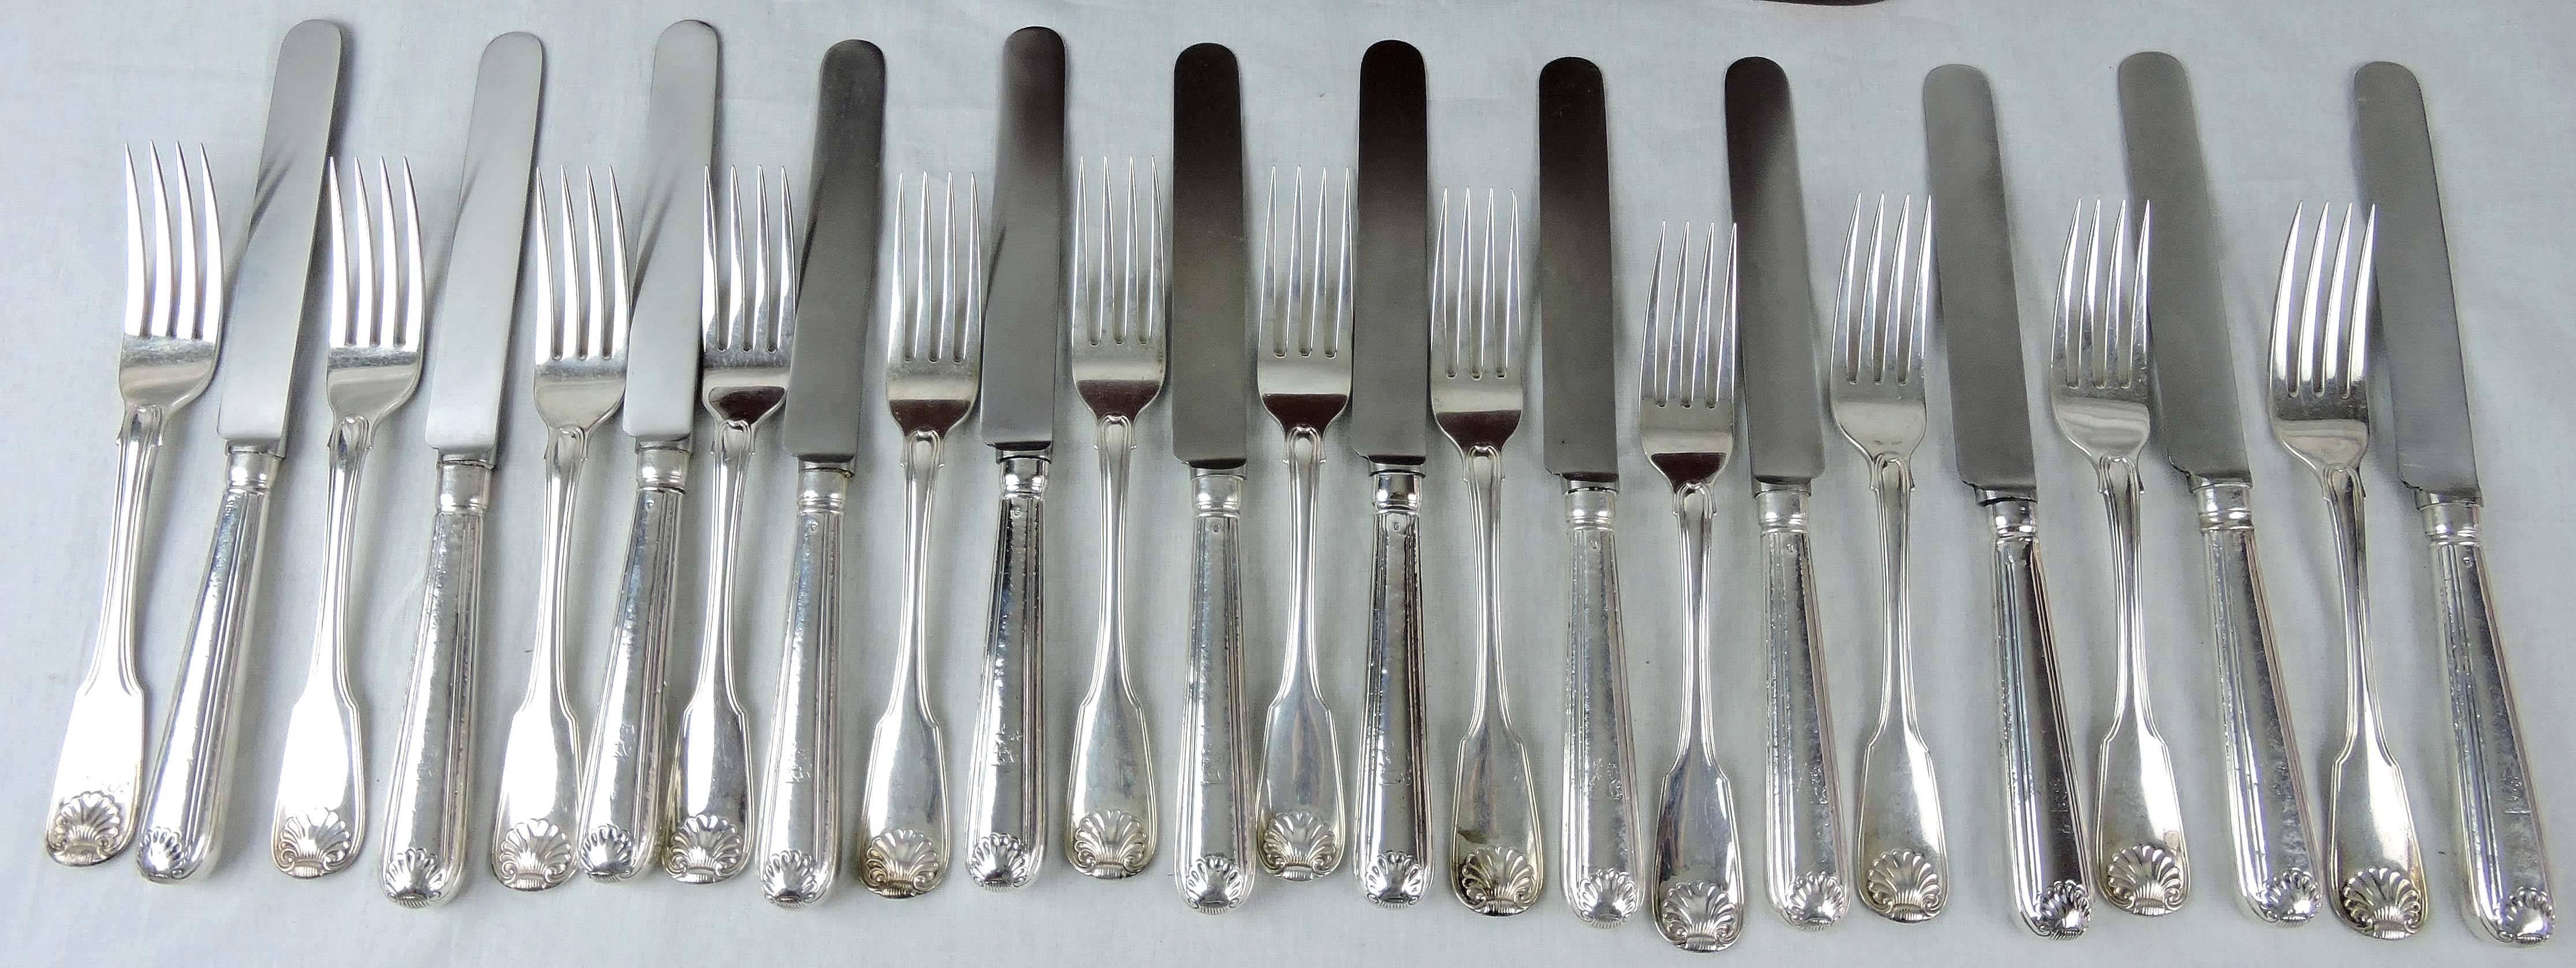 Georian Period Fiddle, Thread & Shell Sterling Silver Flatware Dinner Set for 12 For Sale 2